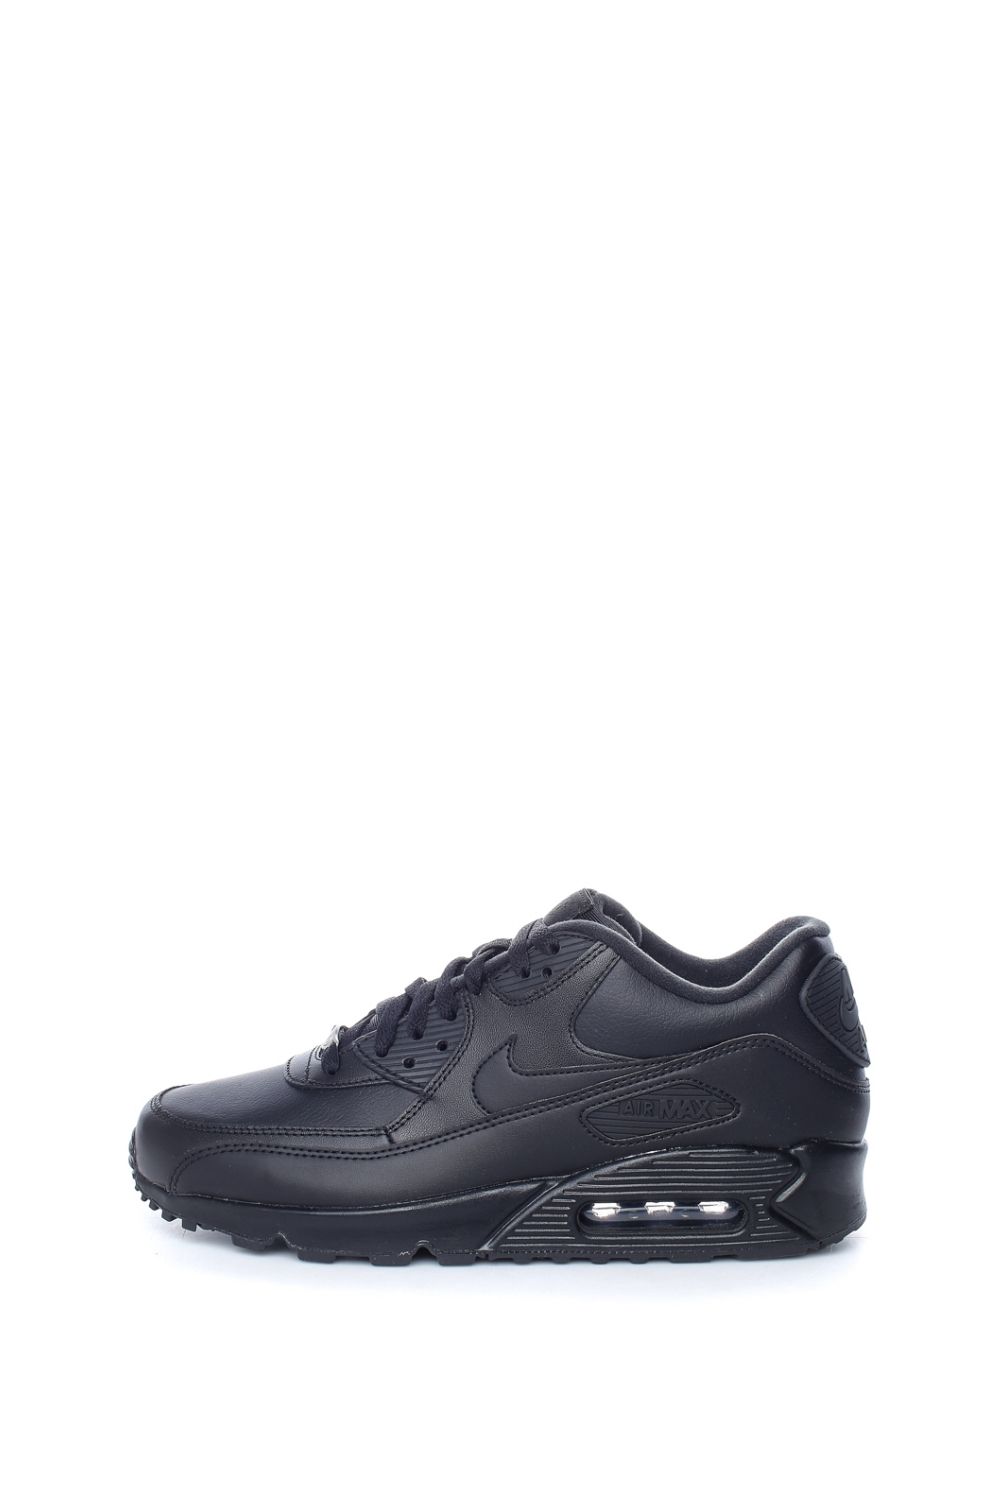 NIKE - Ανδρικά παπούτσια running NIKE AIR MAX 90 LEATHER μαύρα